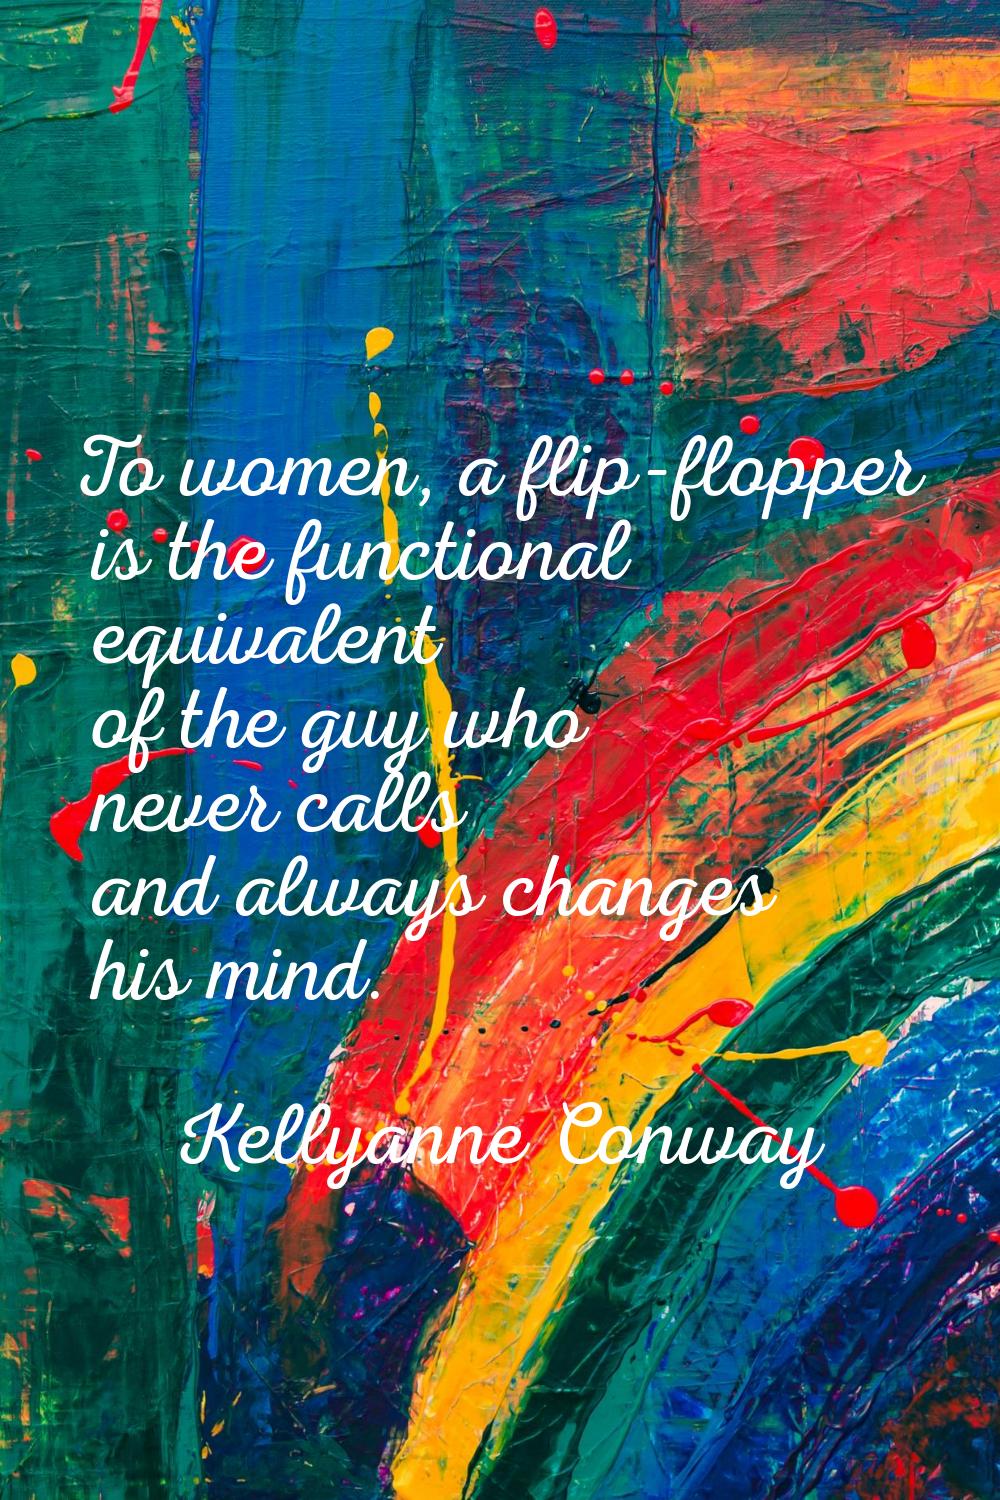 To women, a flip-flopper is the functional equivalent of the guy who never calls and always changes